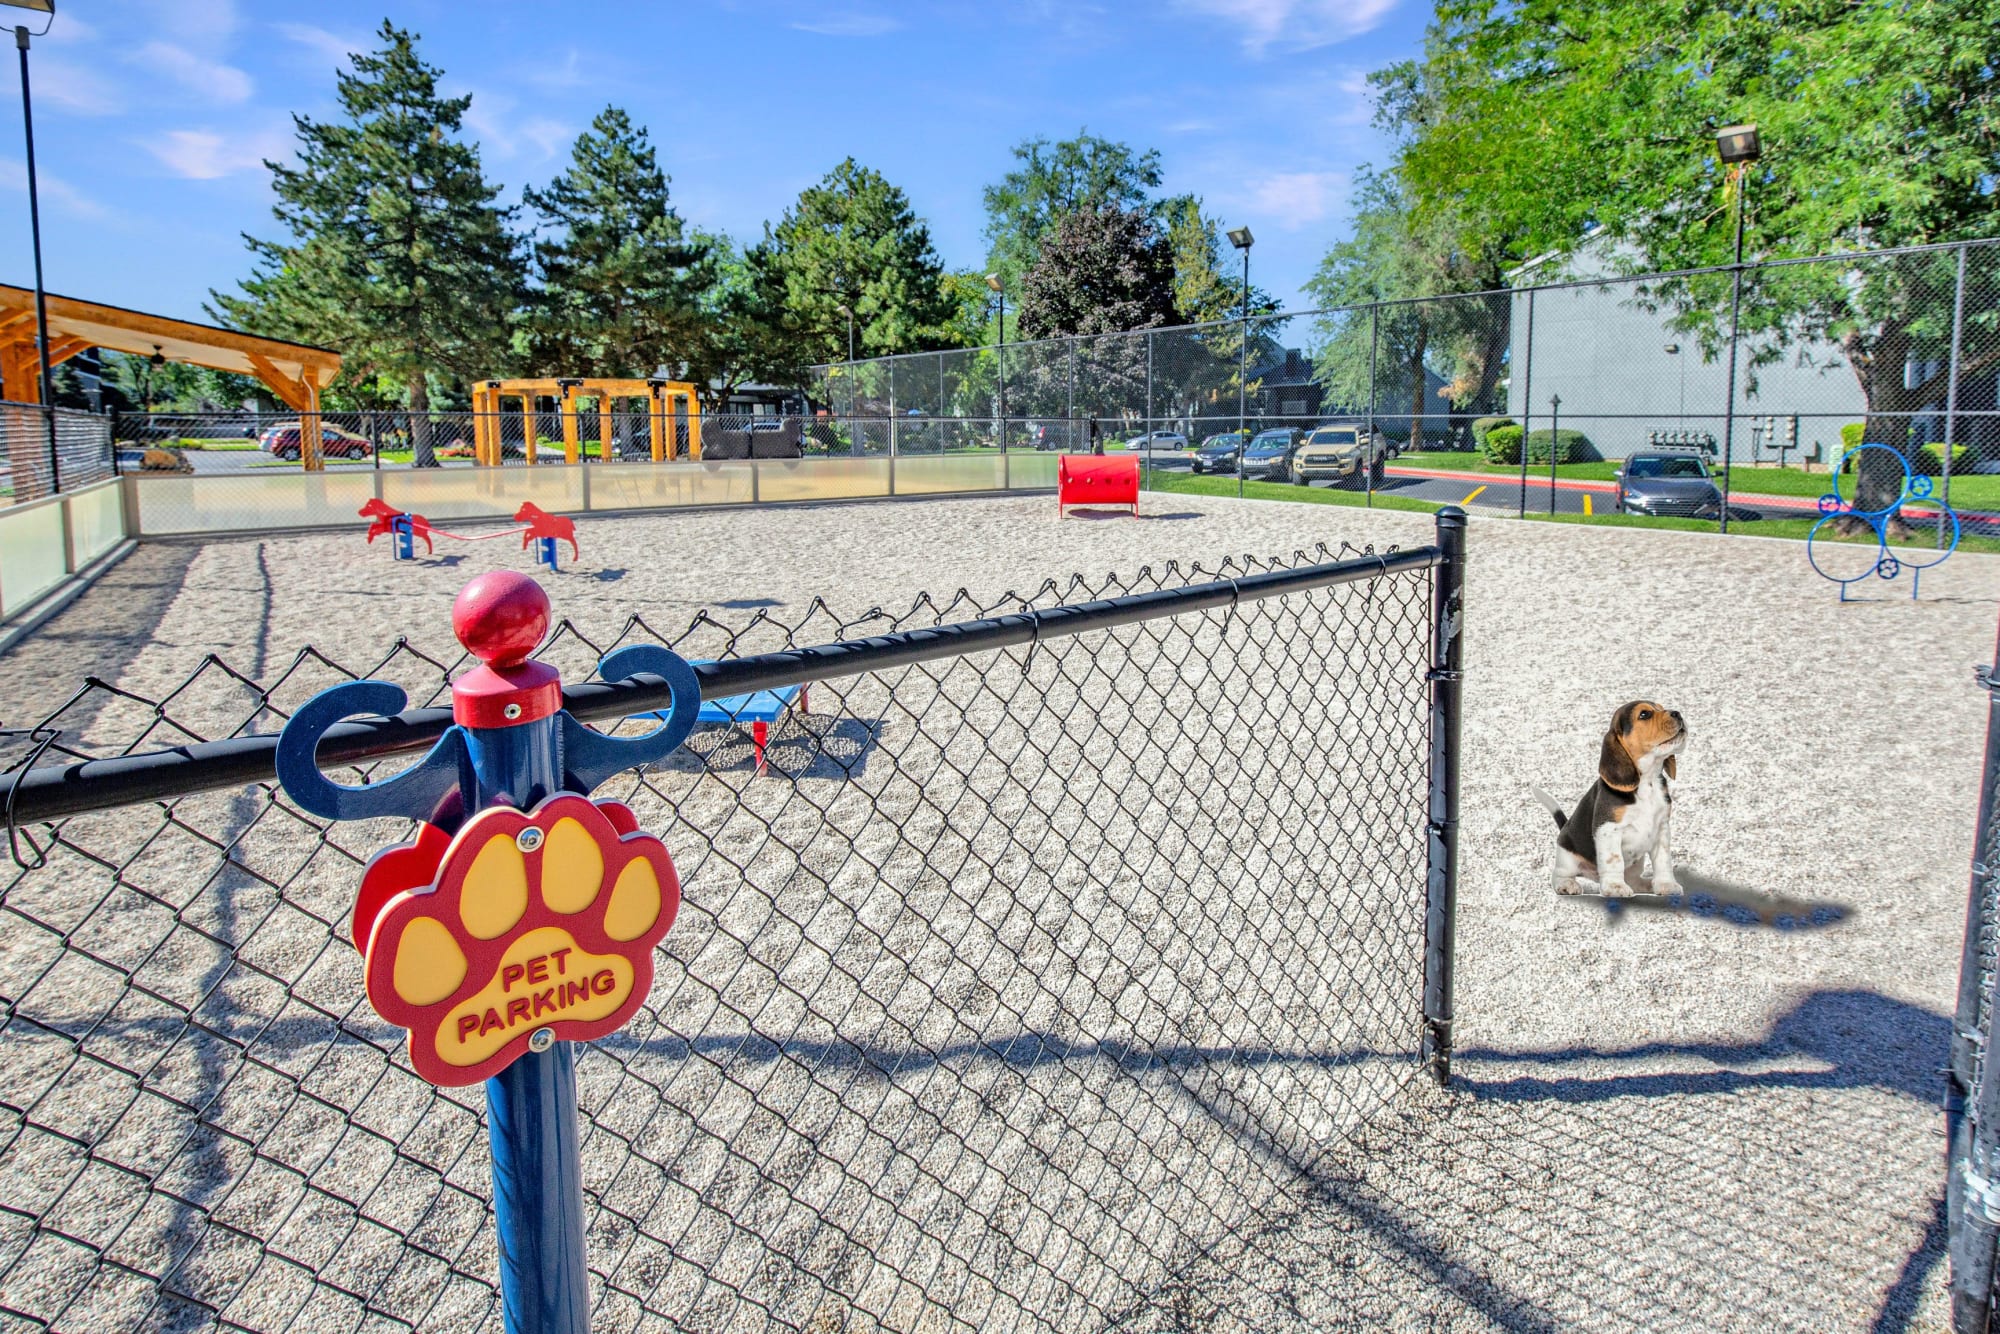 The off-leash dog park for your furry friends at Royal Farms Apartments in Salt Lake City, Utah